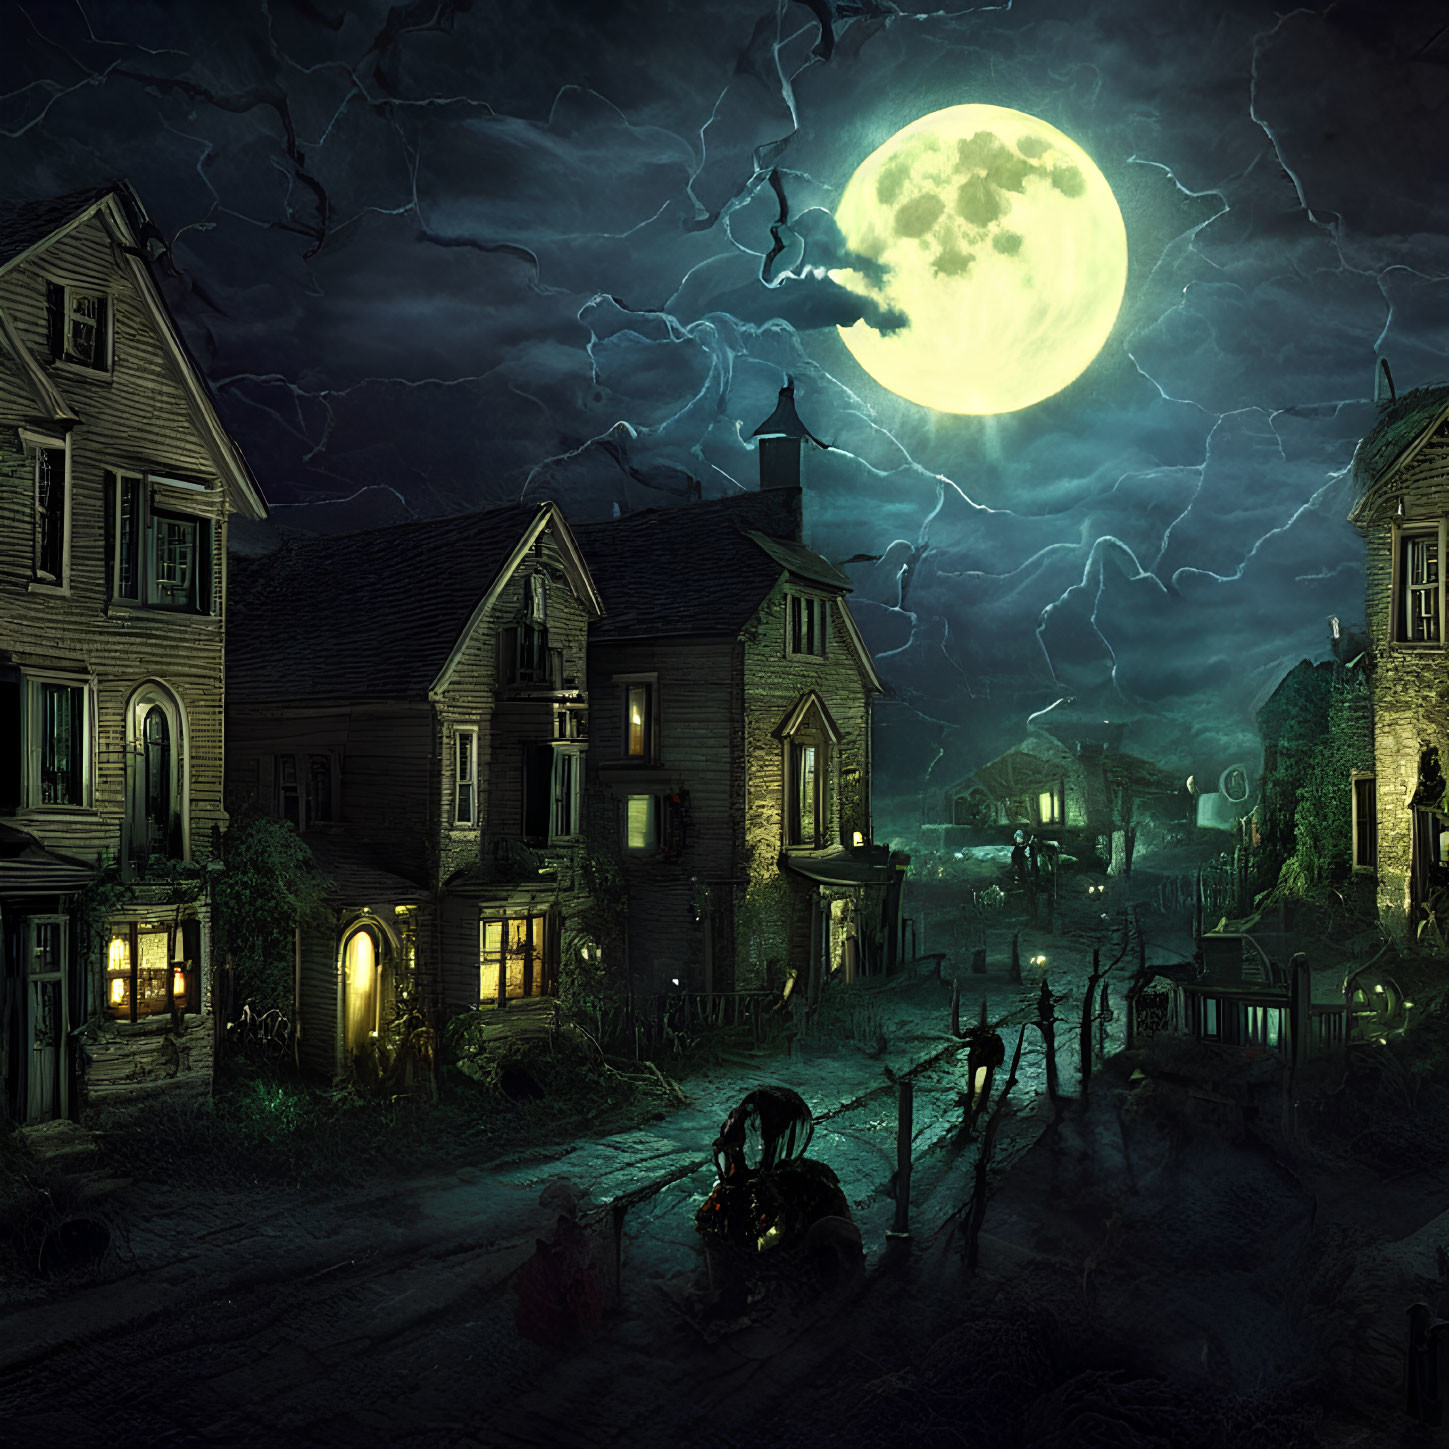 Moonlit Victorian town street with silhouettes under stormy sky